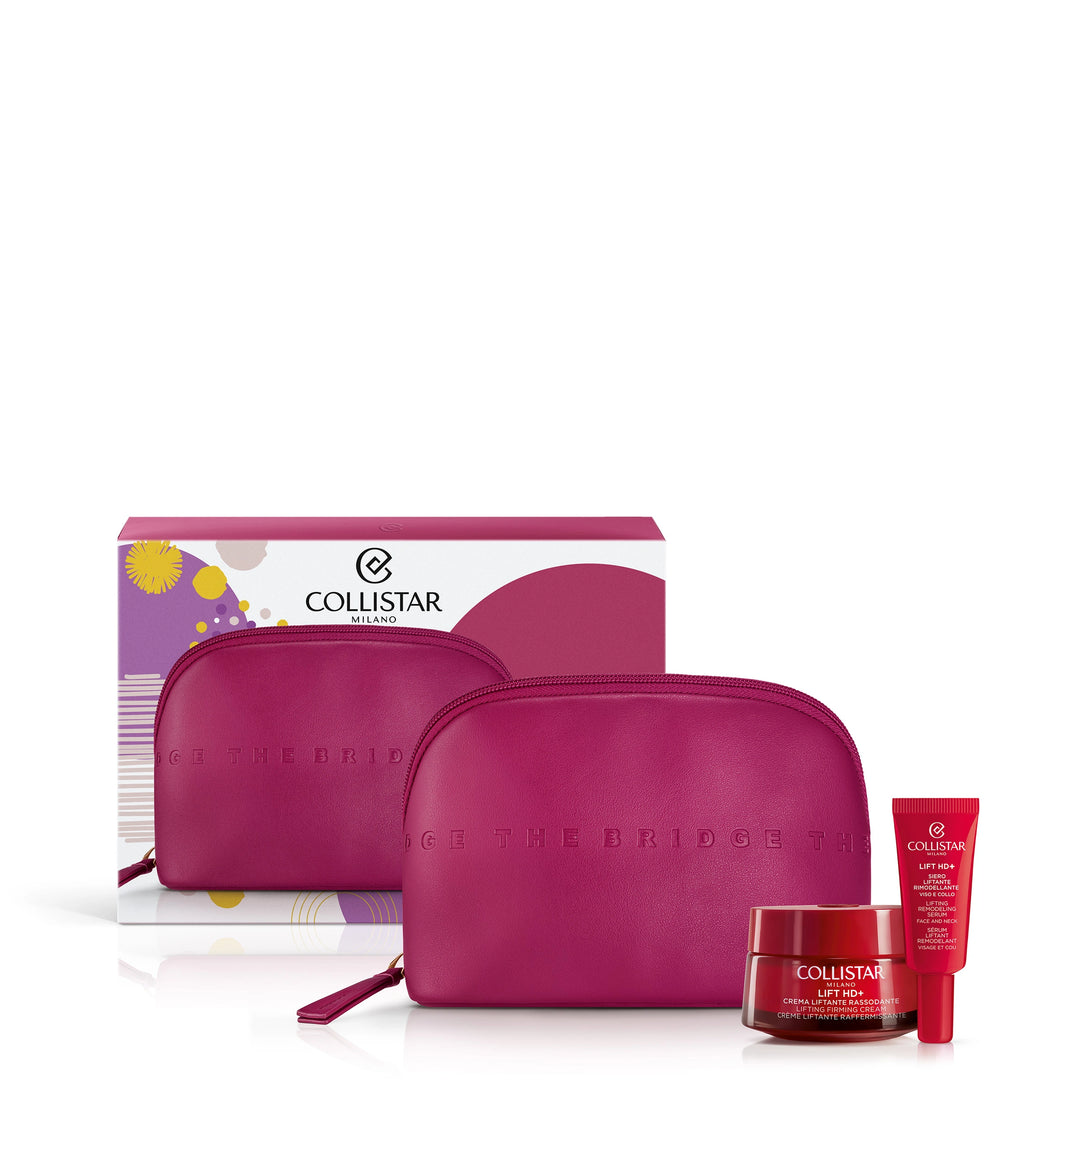 

Collistar Lift HD+ Gift Set includes a 50 ml Lifting Firming Cream, a 7 ml Lifting and Remodelling Serum for Face and Neck, and a beauty bag from The Bridge brand.